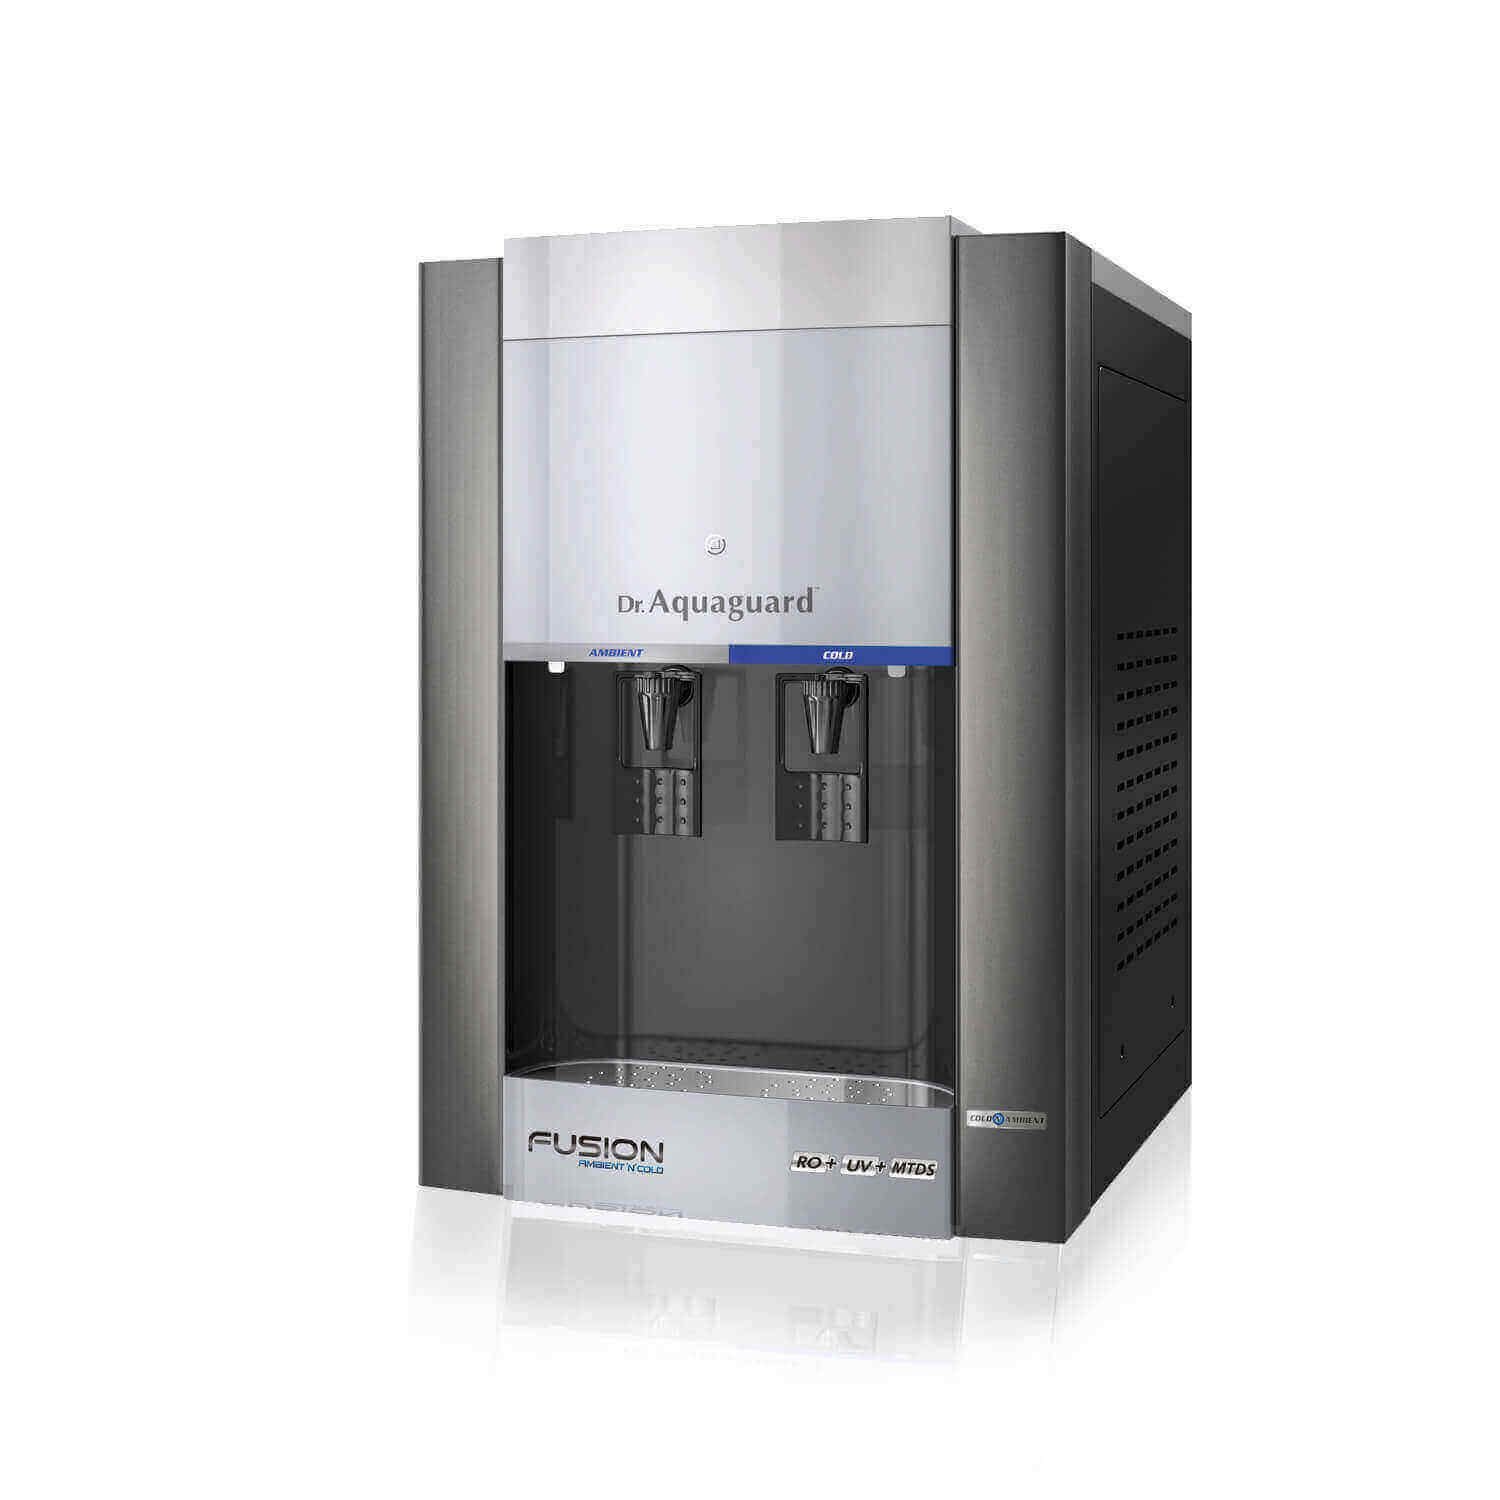 Dr. Aquaguard Fusion Ambient n Cold Water Purifier